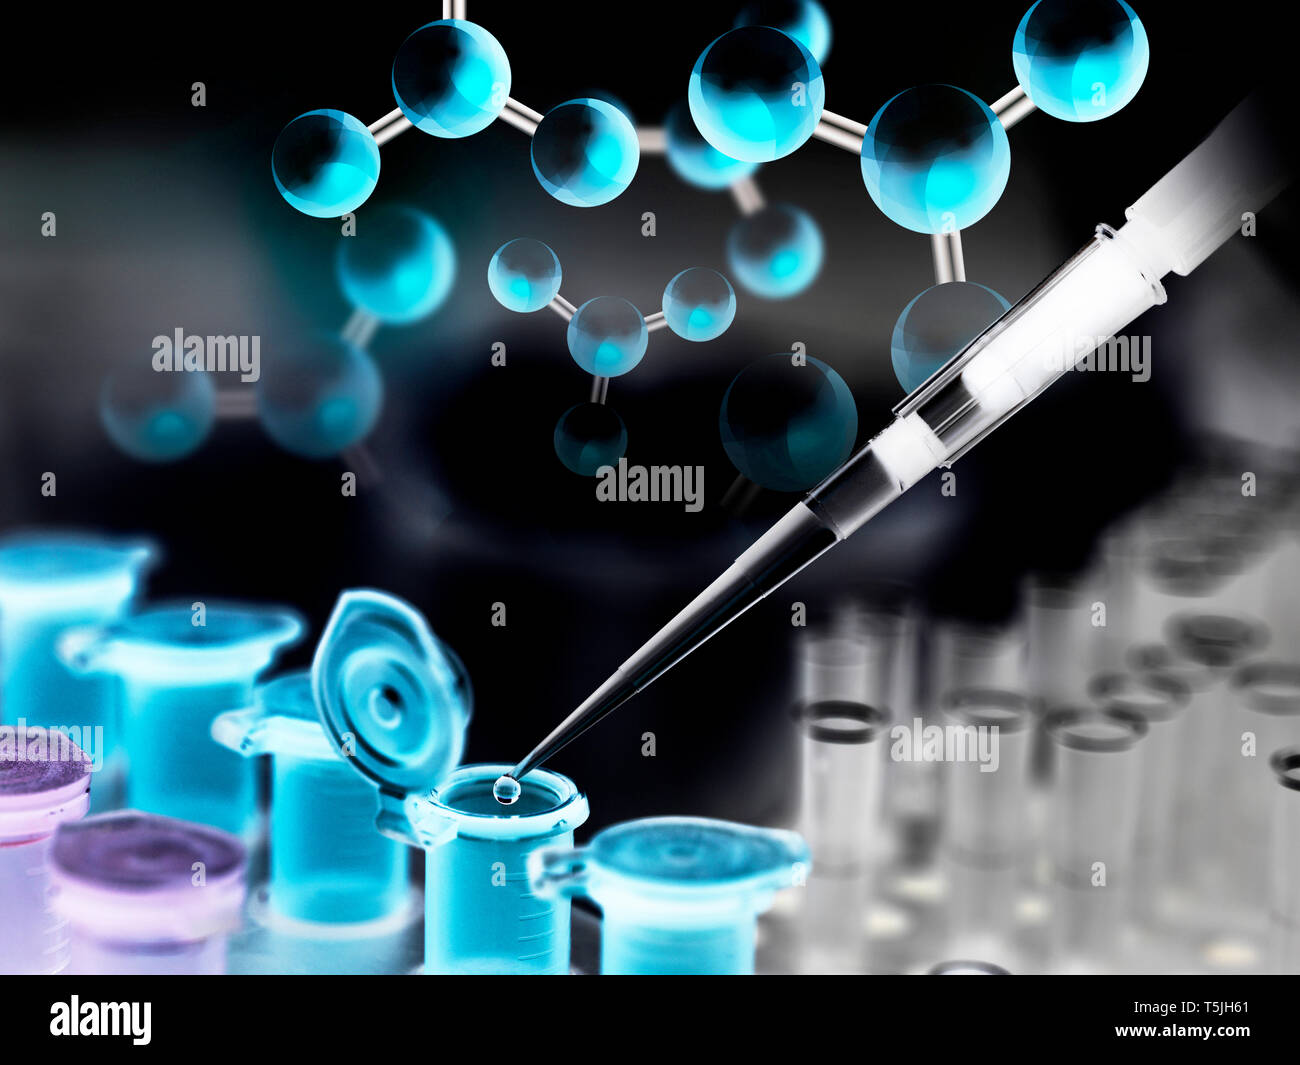 A chemical sample being pipetted into a eppendorf tube with a chemical compound in the background Stock Photo